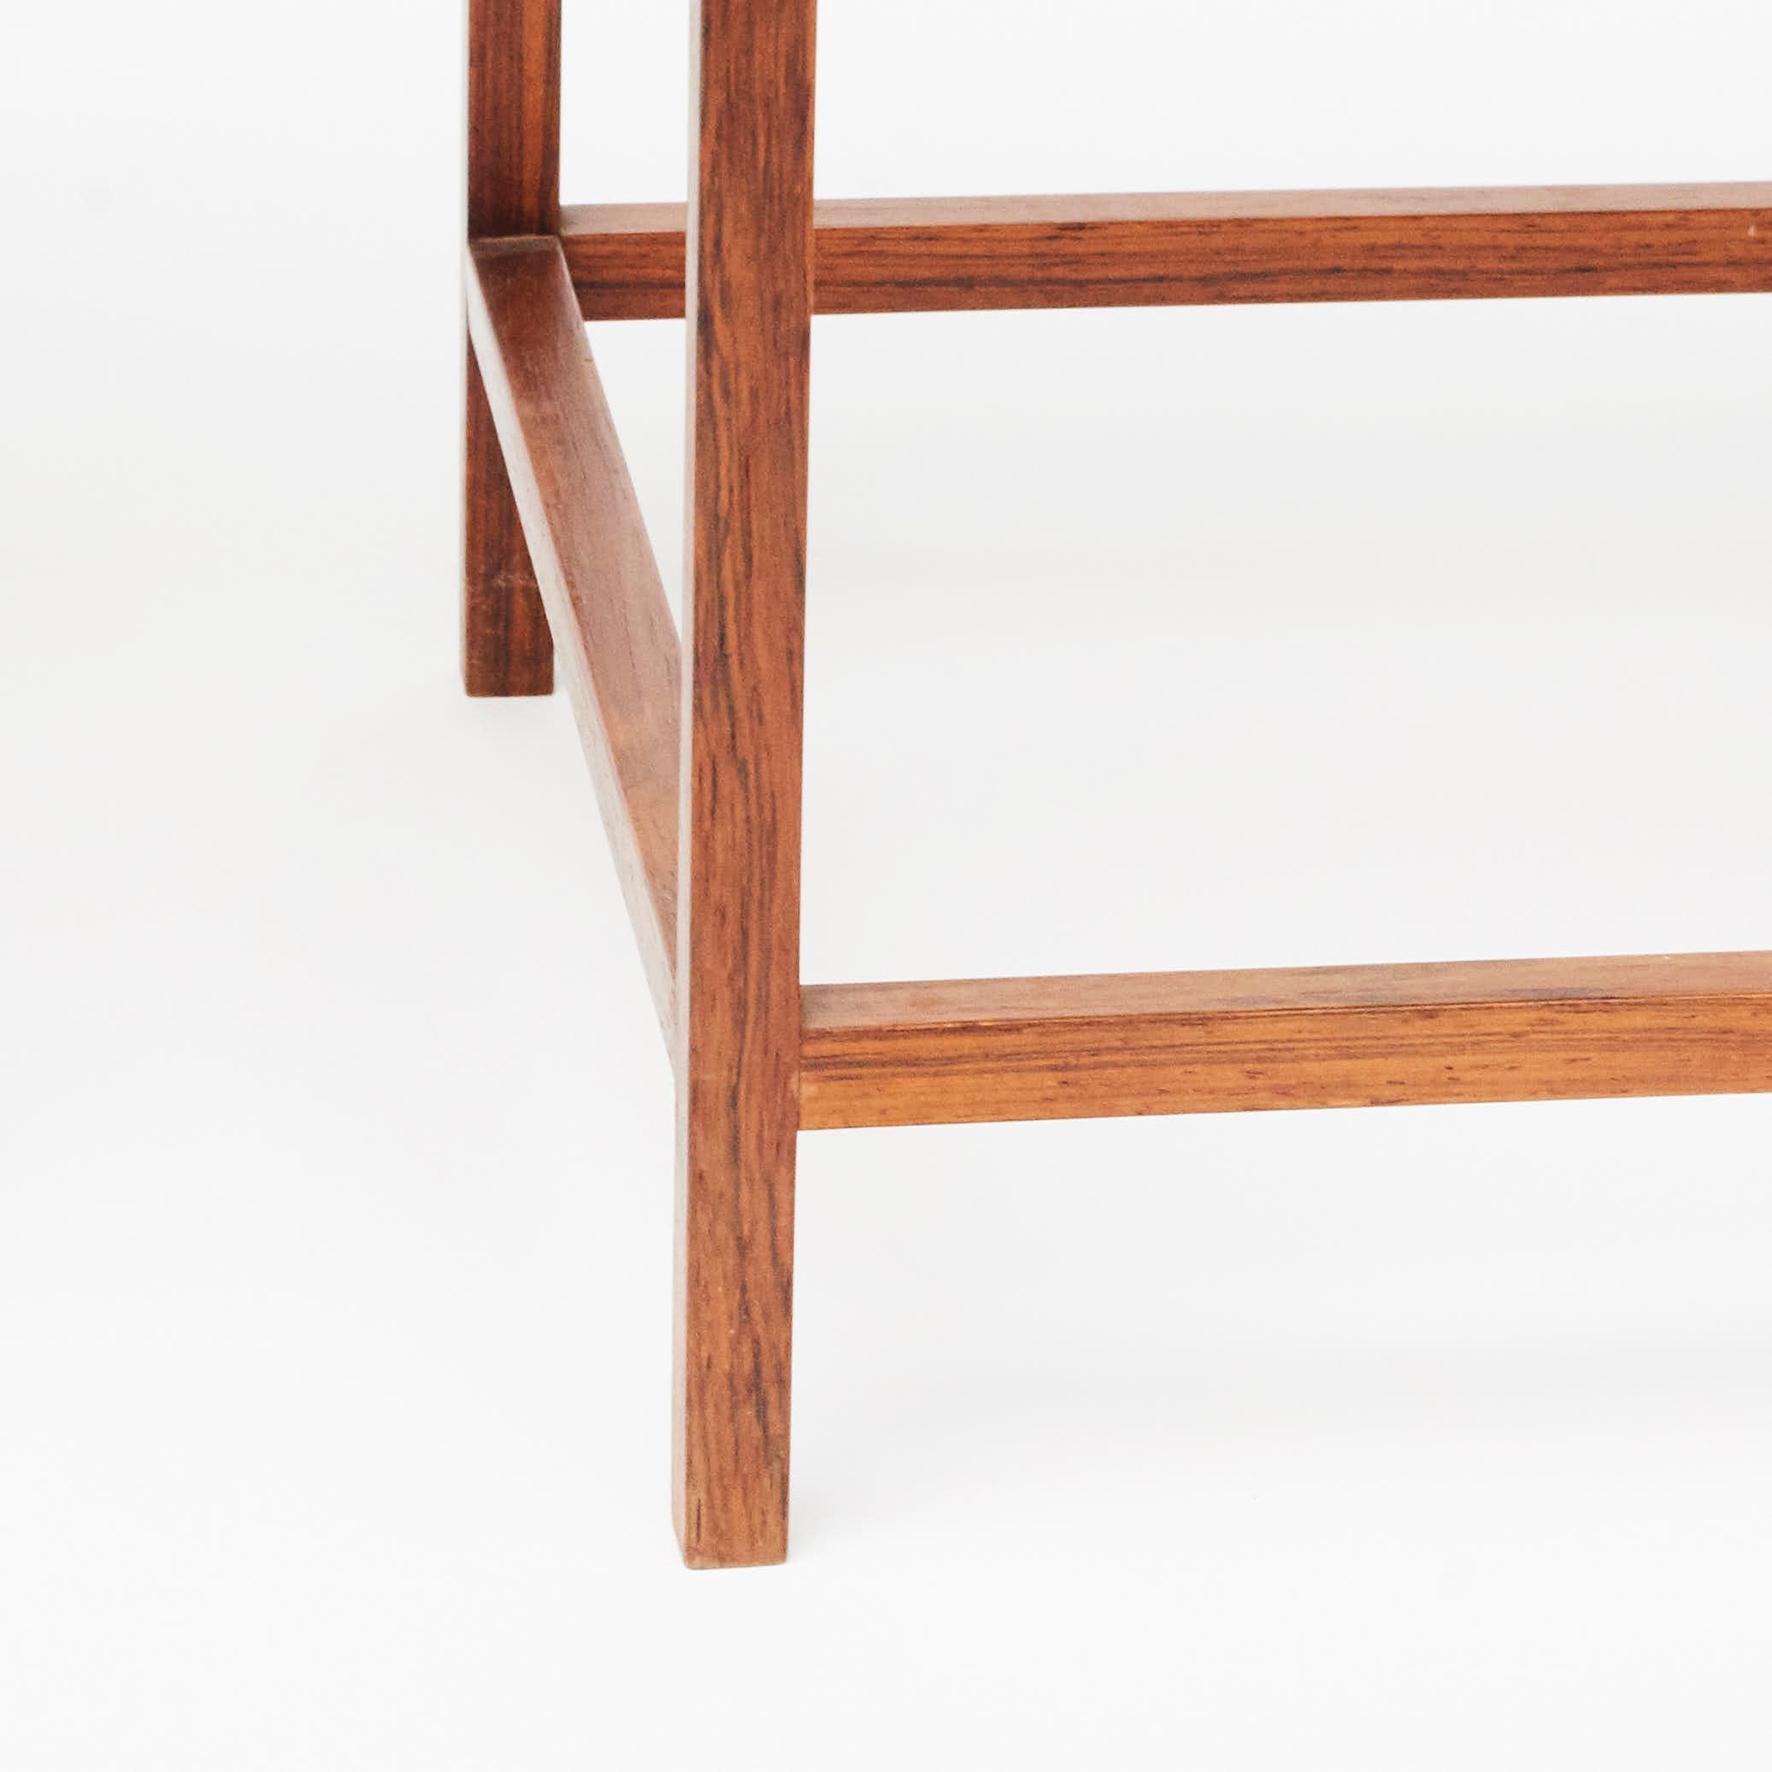 European Pair of Rosewood Side Tables by Willy Beck, Denmark, 1950s